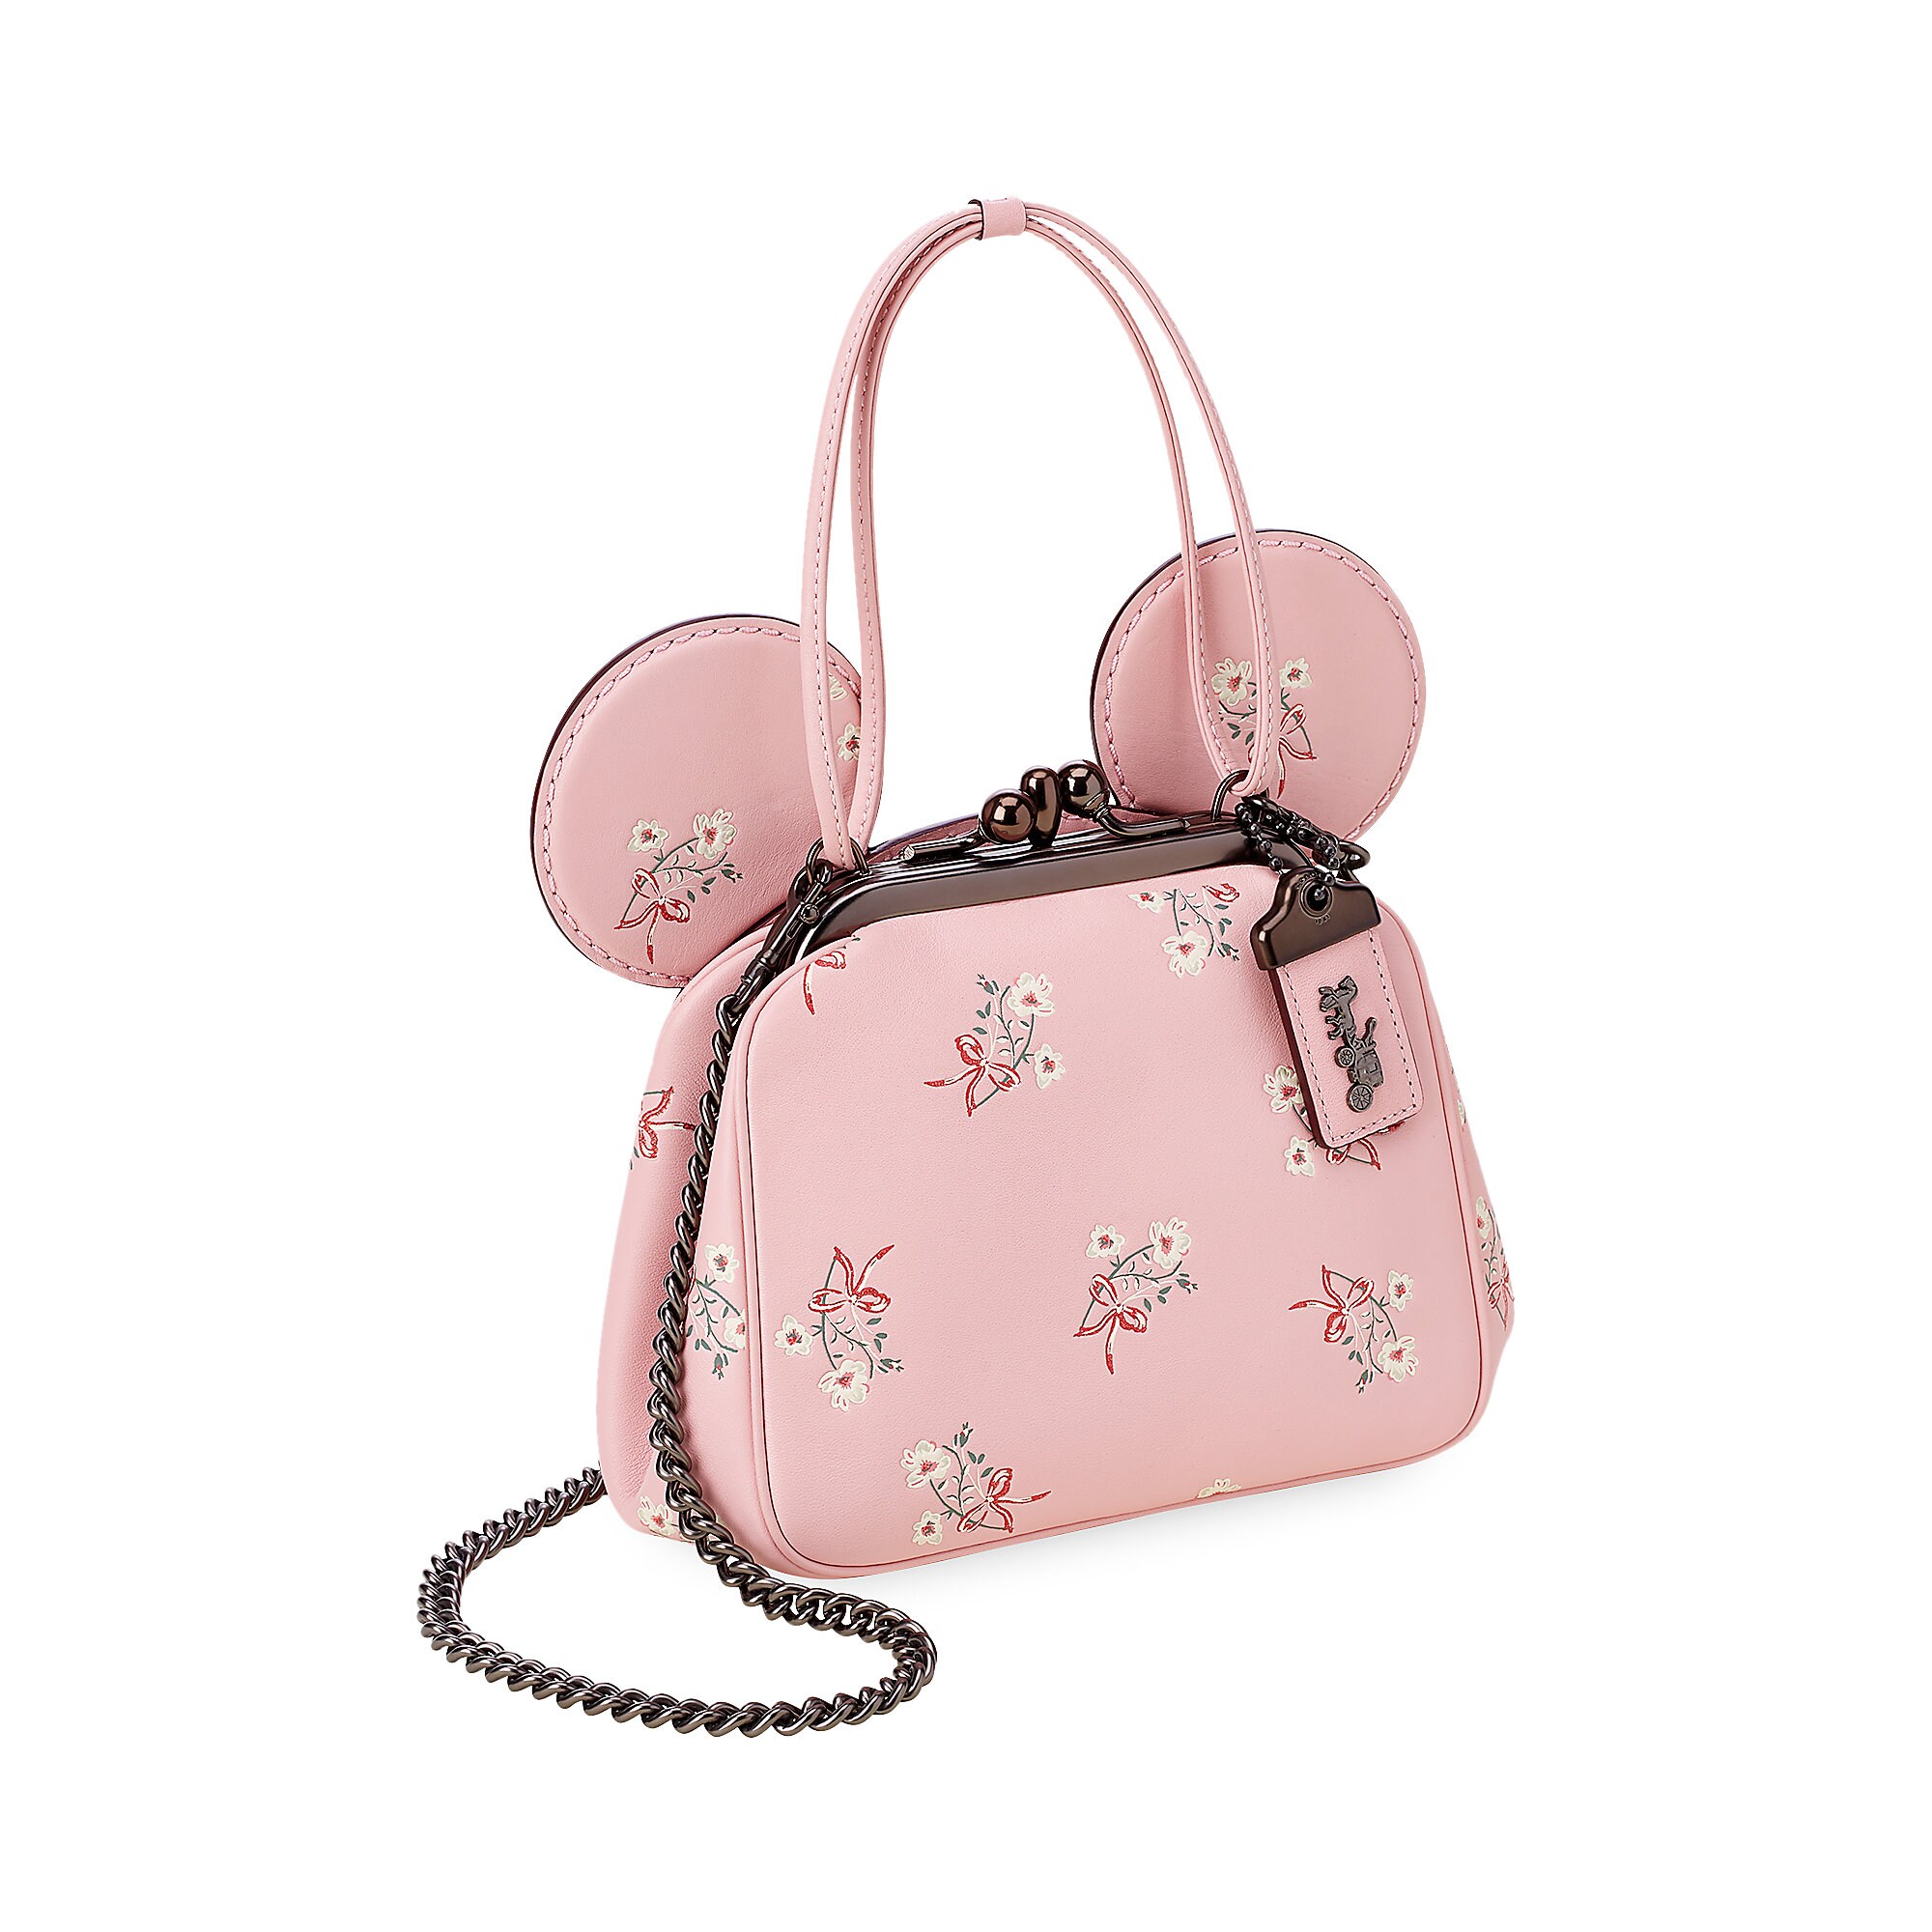 Minnie Mouse Floral Kisslock Leather Bag by COACH - Pink